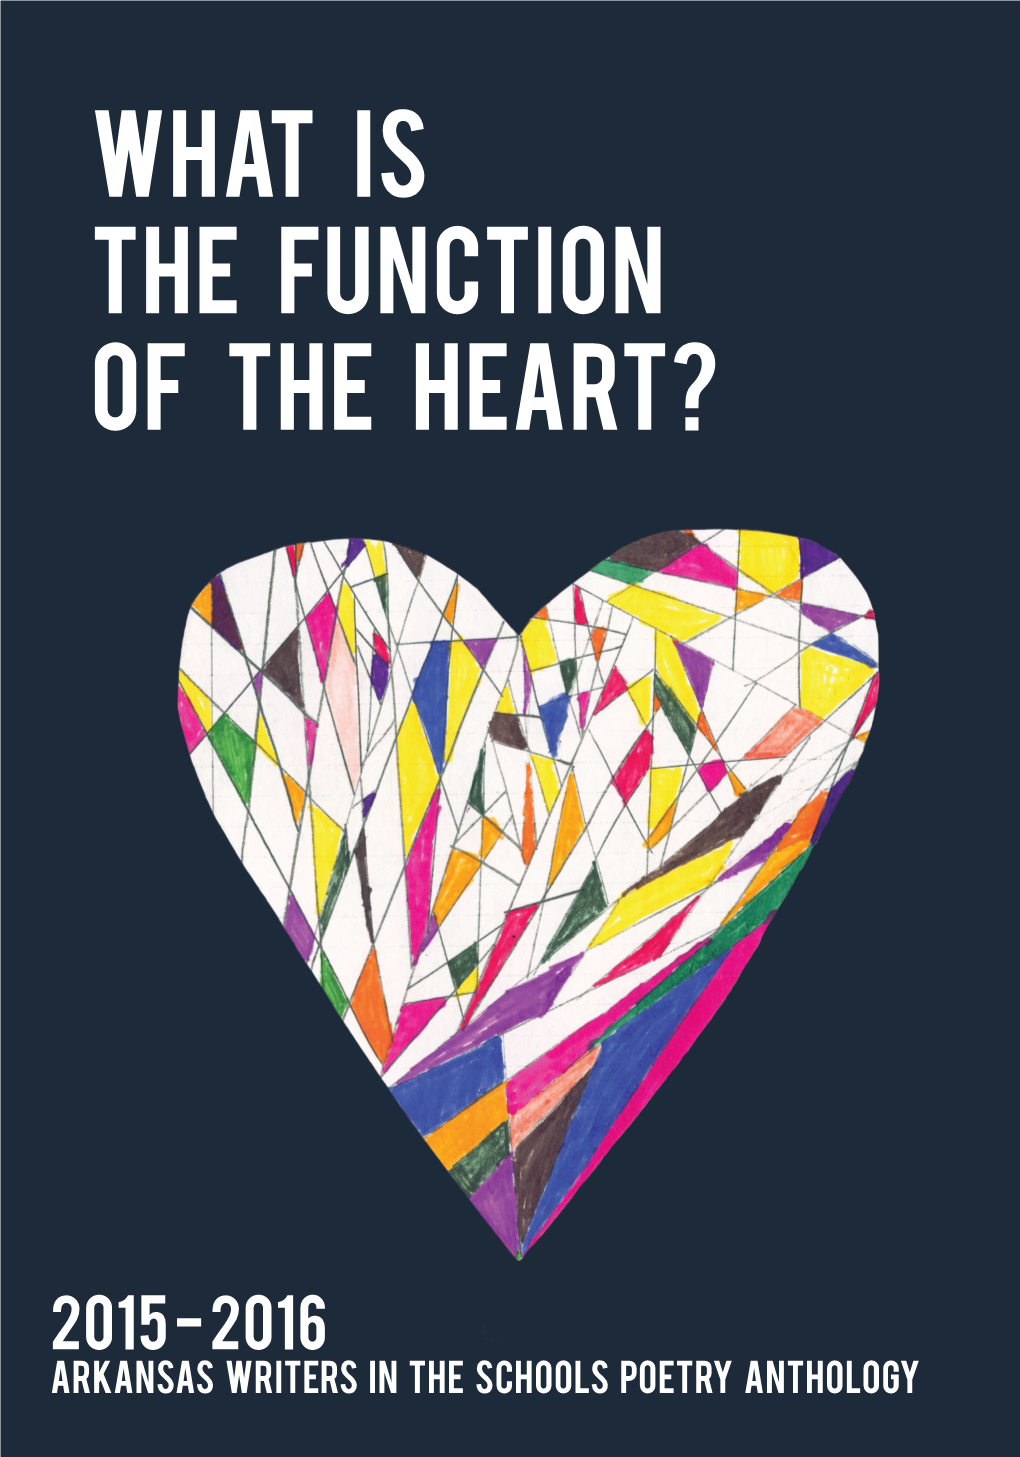 WHAT IS the FUNCTION of the HEART?